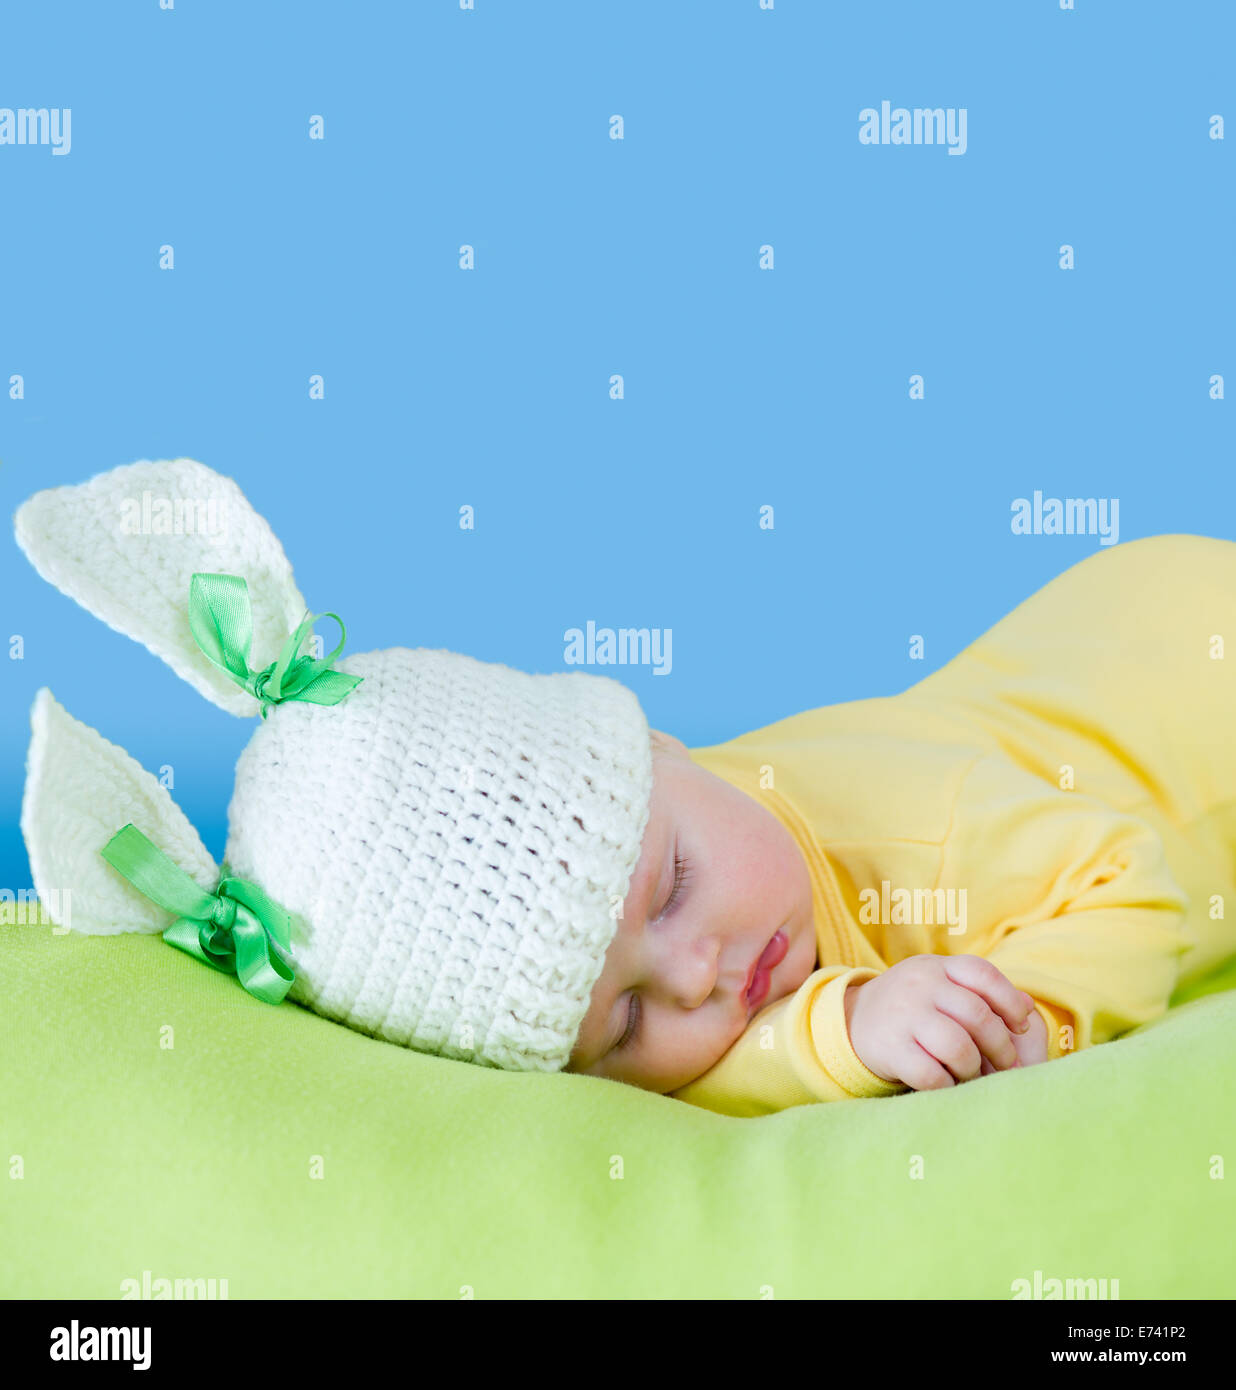 sleeping baby closeup portrait in hare or rabbit hat with expandable blue copyspace Stock Photo